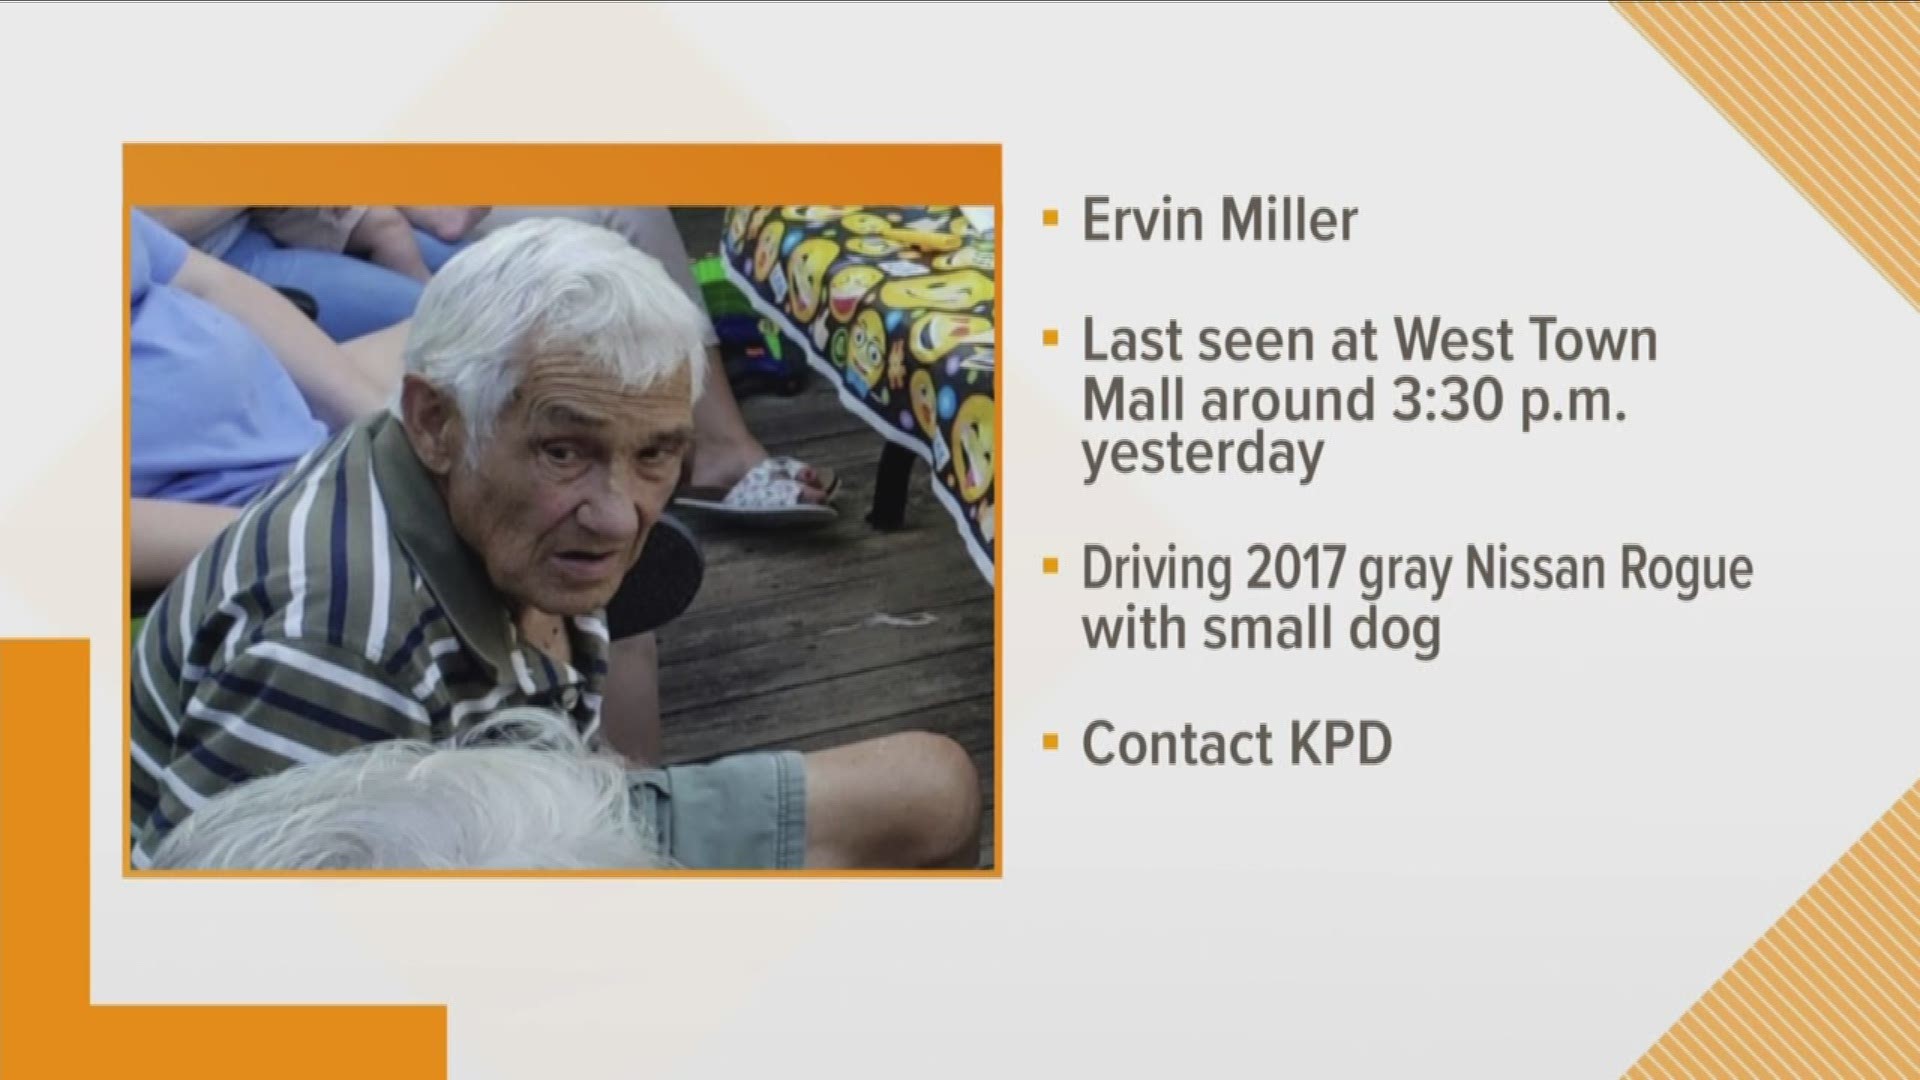 KPD says Ervin Miller, 78, was last seen Tuesday afternoon at West Town Mall.